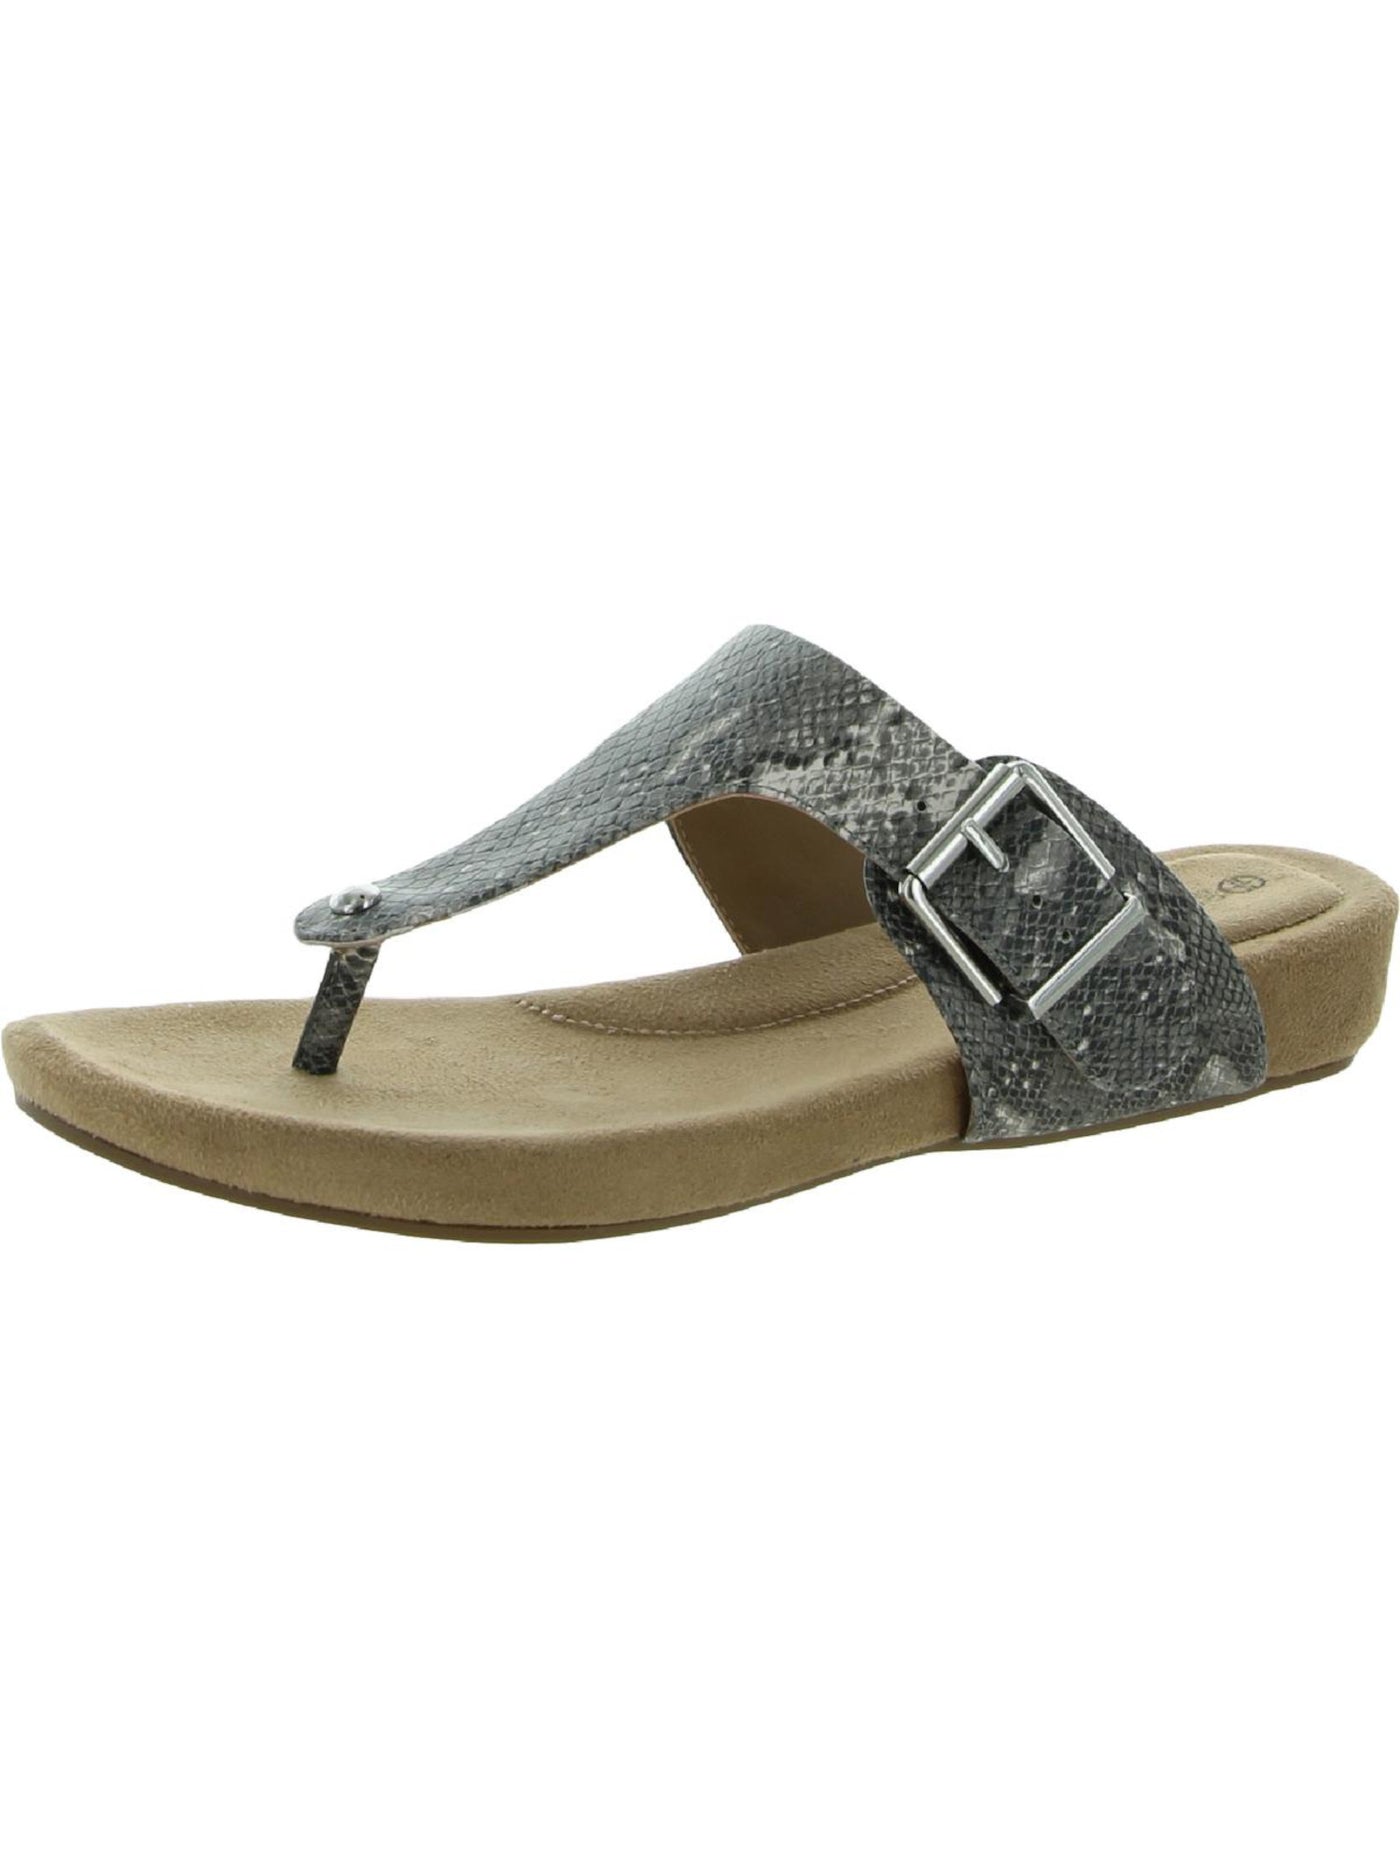 GIANI BERNINI Womens Gray Buckle Accent Adjustable Rivver Round Toe Slip On Thong Sandals Shoes 8.5 M